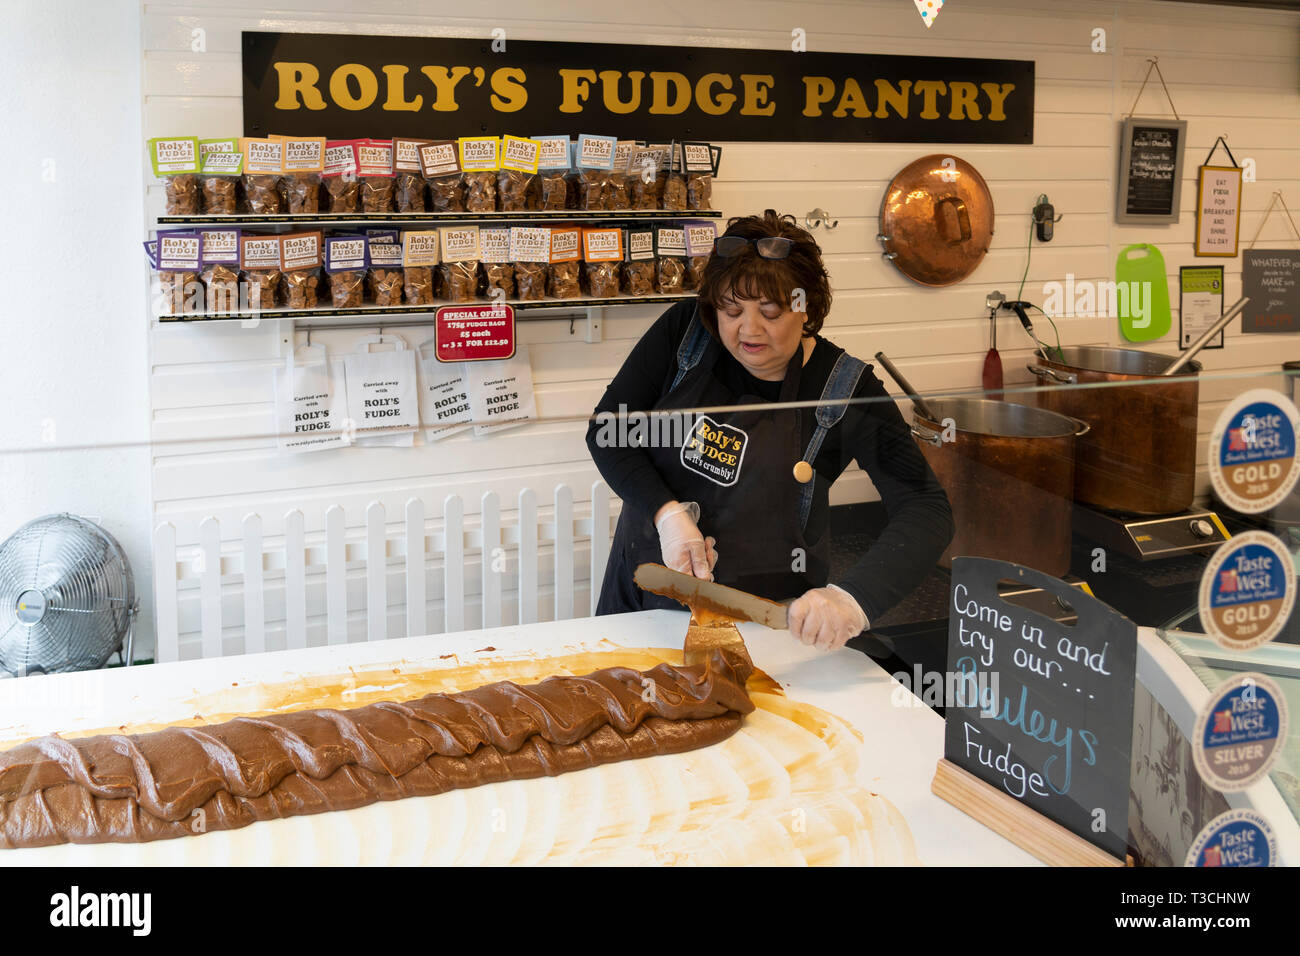 A fudge maker in Roly's Fudge Pantry in Stratford upon Avon making fudge in the traditional method by stirring the fudge with a paddle Stock Photo